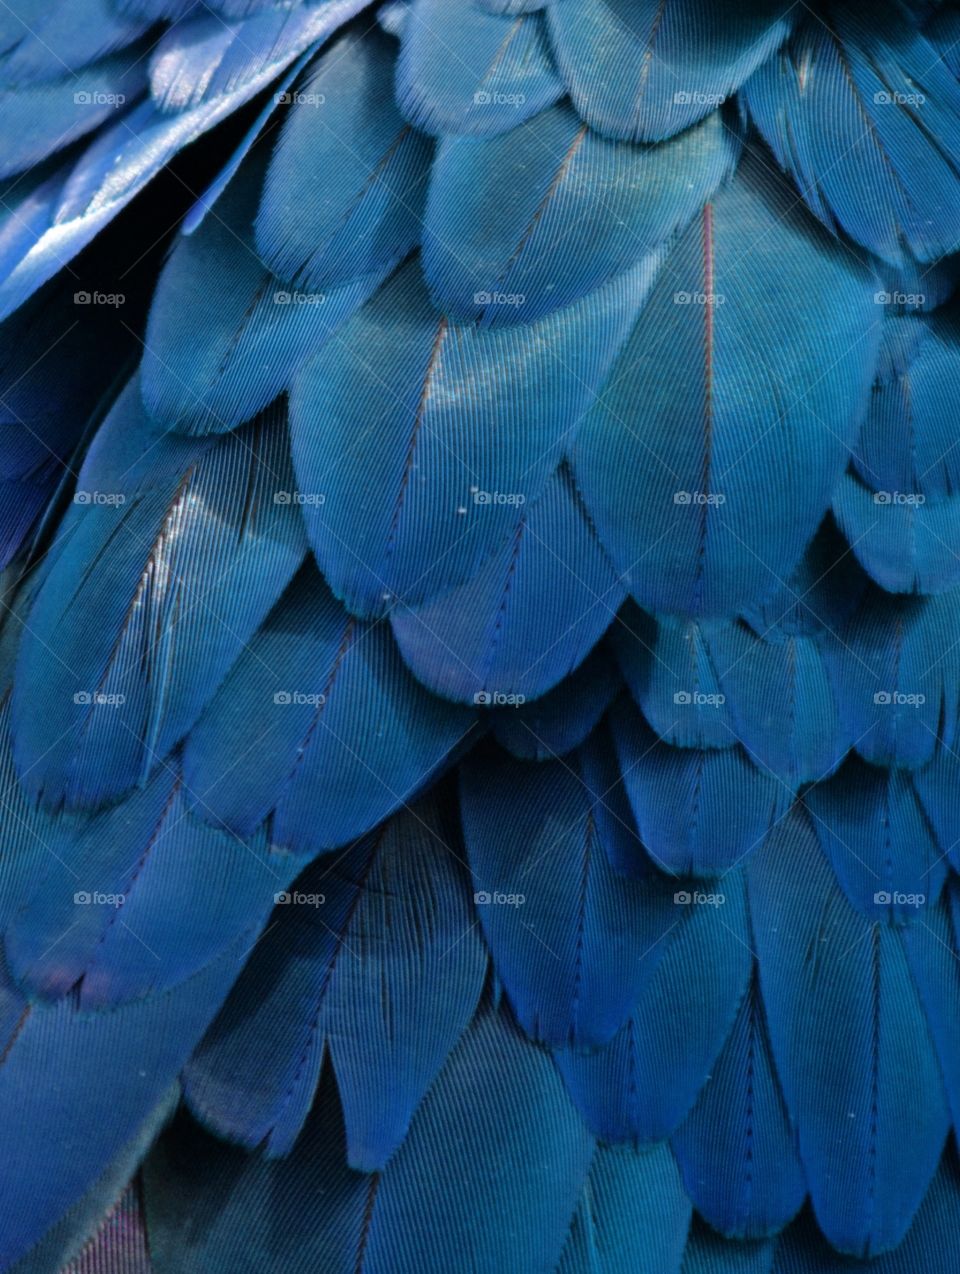 Blue Feathers 